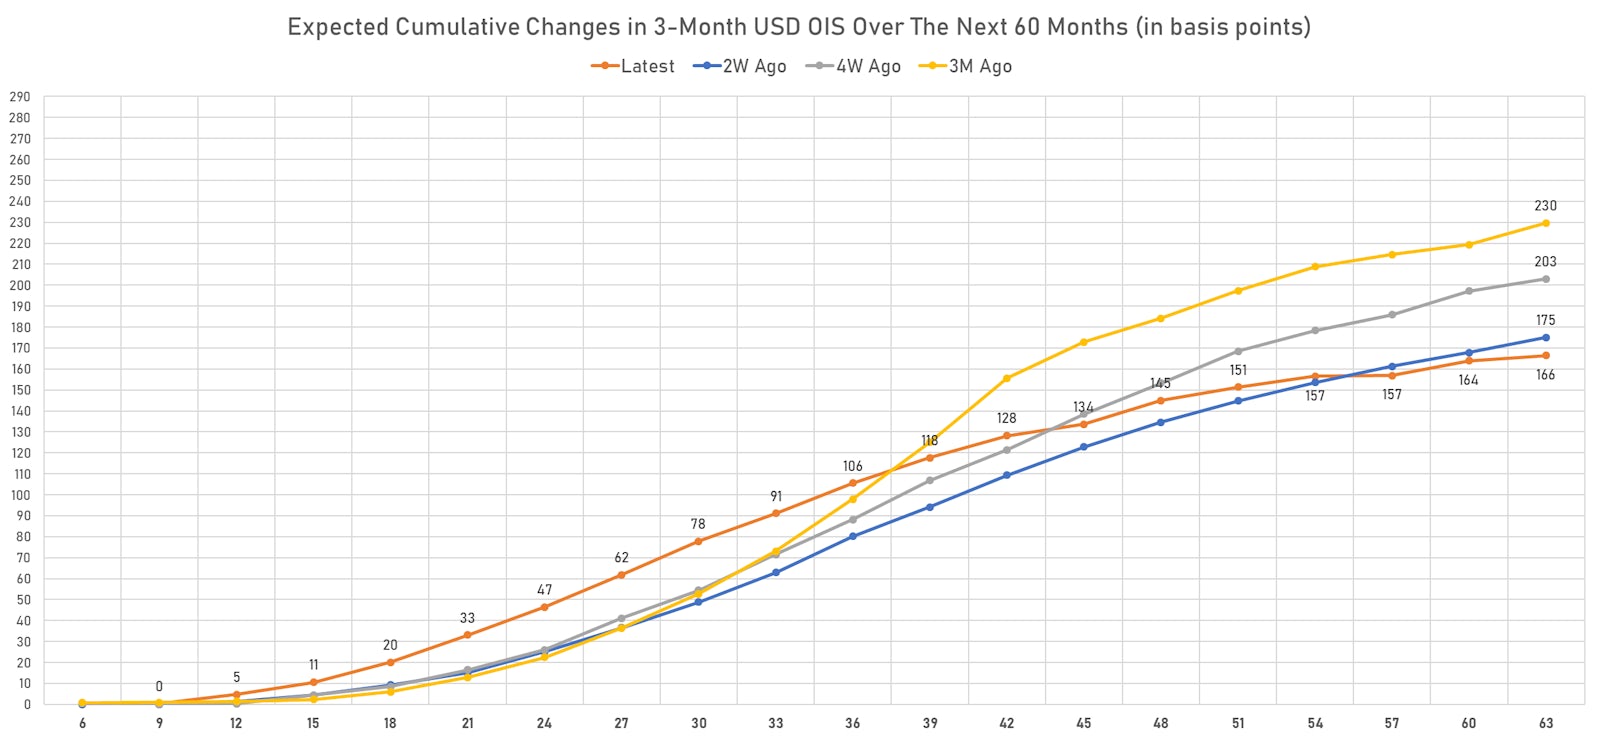 Short-term USD rates Over the next 5 years | Sources: ϕpost, Refinitiv data